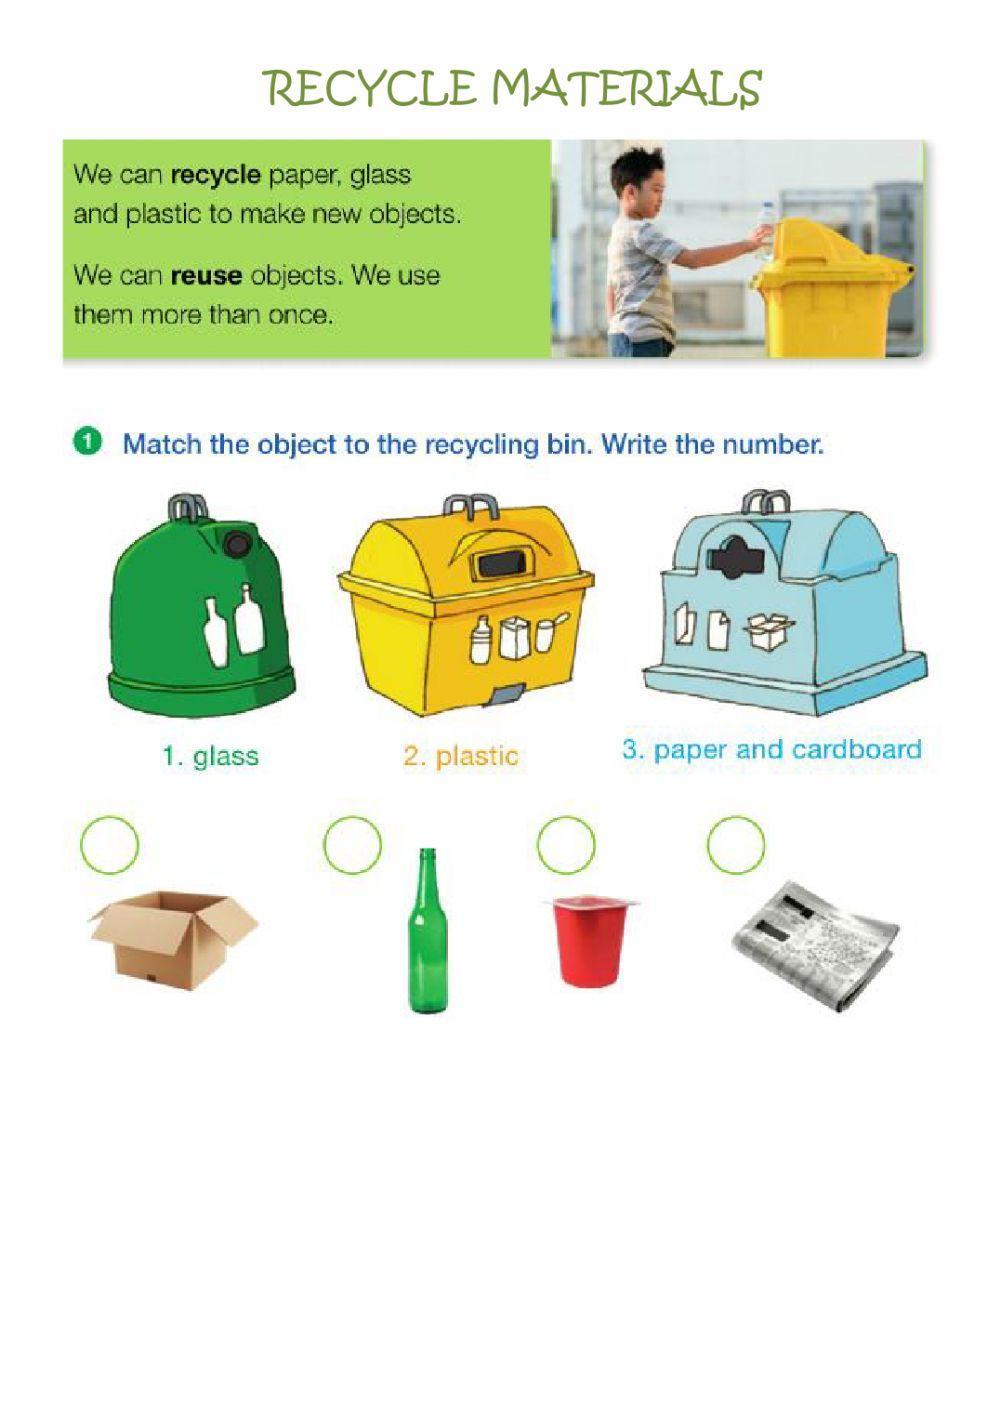 Materials & recycling